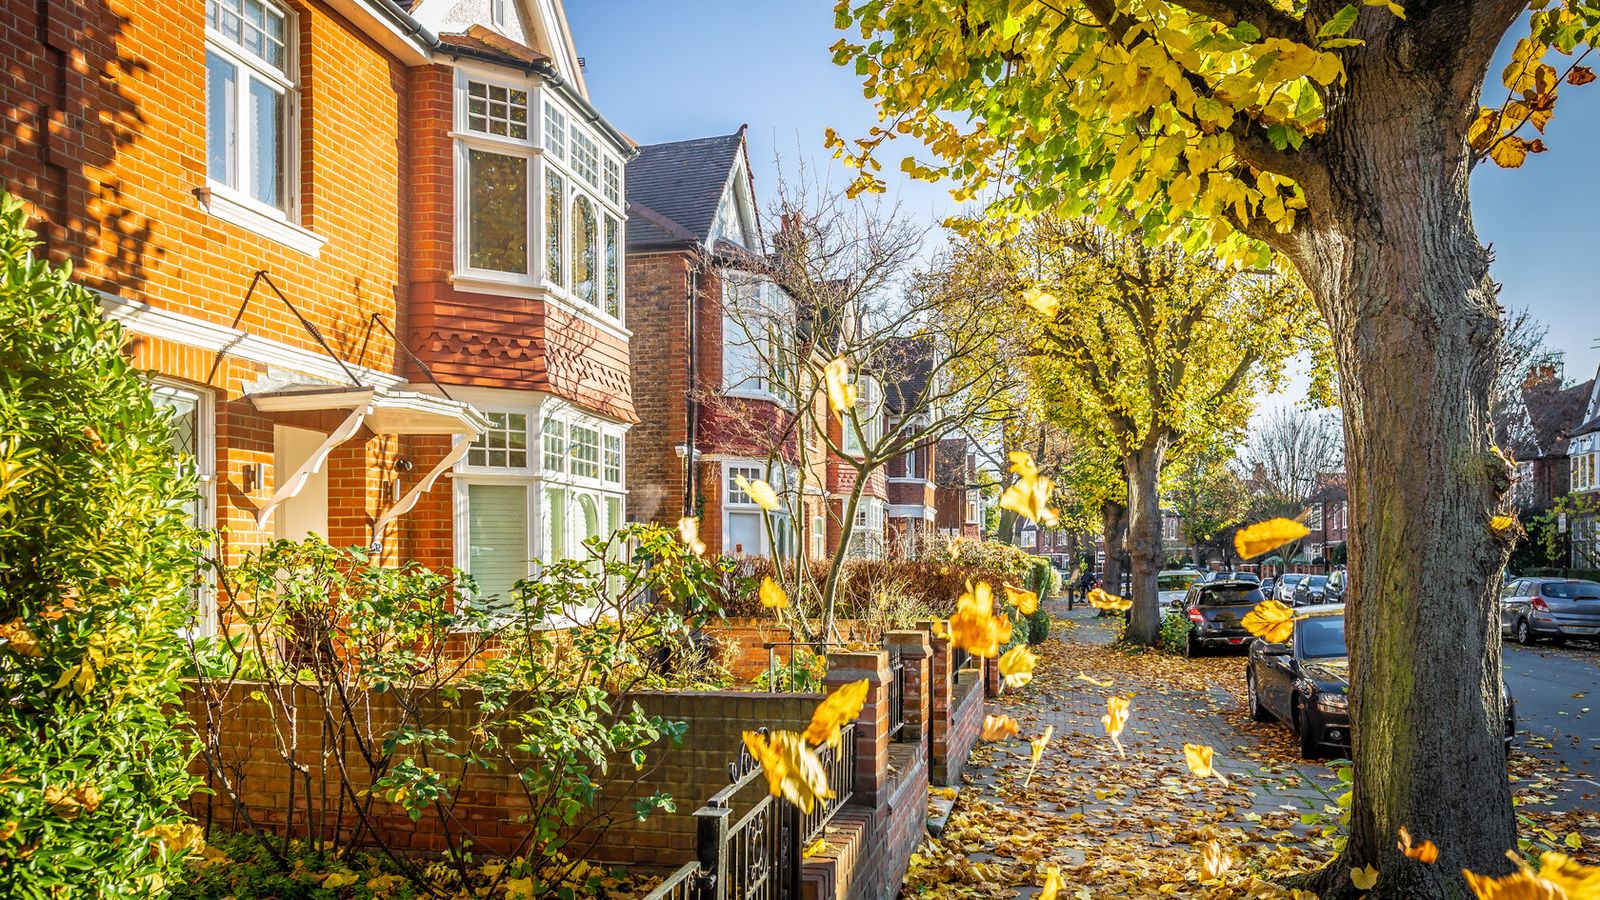 House price growth slows as buyers 'take note of economic headwinds'